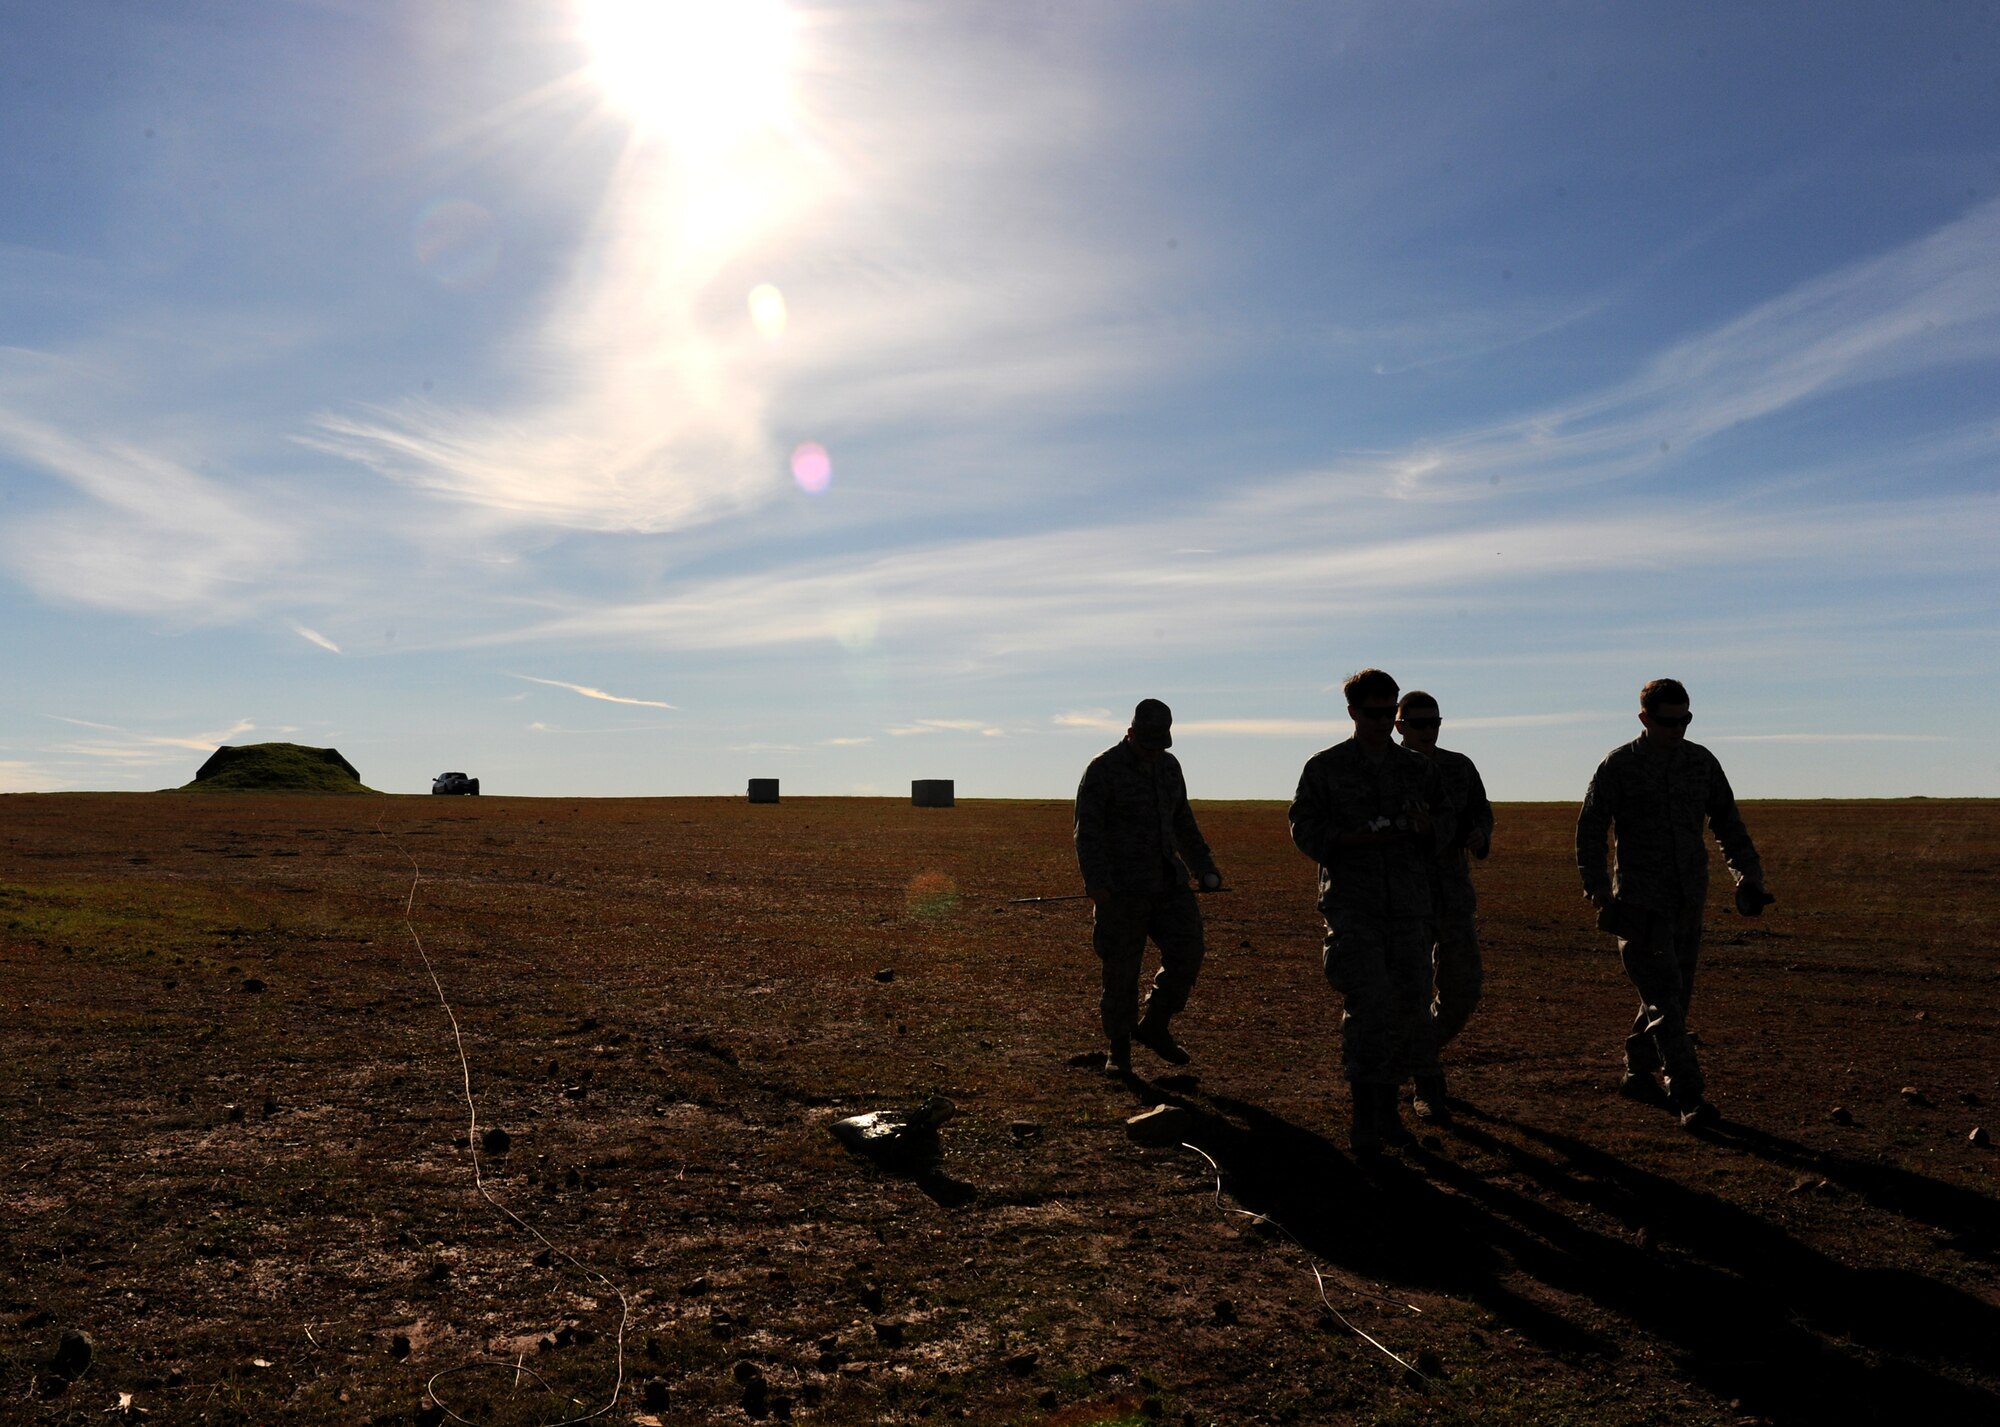 Members of the 9th Civil Engineer Squadron Explosive Ordnance Disposal Flight walk the EOD range during a training scenario at Beale Air Force Base, Calif., Dec. 19, 2012. EOD Airmen train with different types of explosives to simulate what they may encounter in the field. (U.S. Air Force photo by Staff Sgt. Robert M. Trujillo/Released)